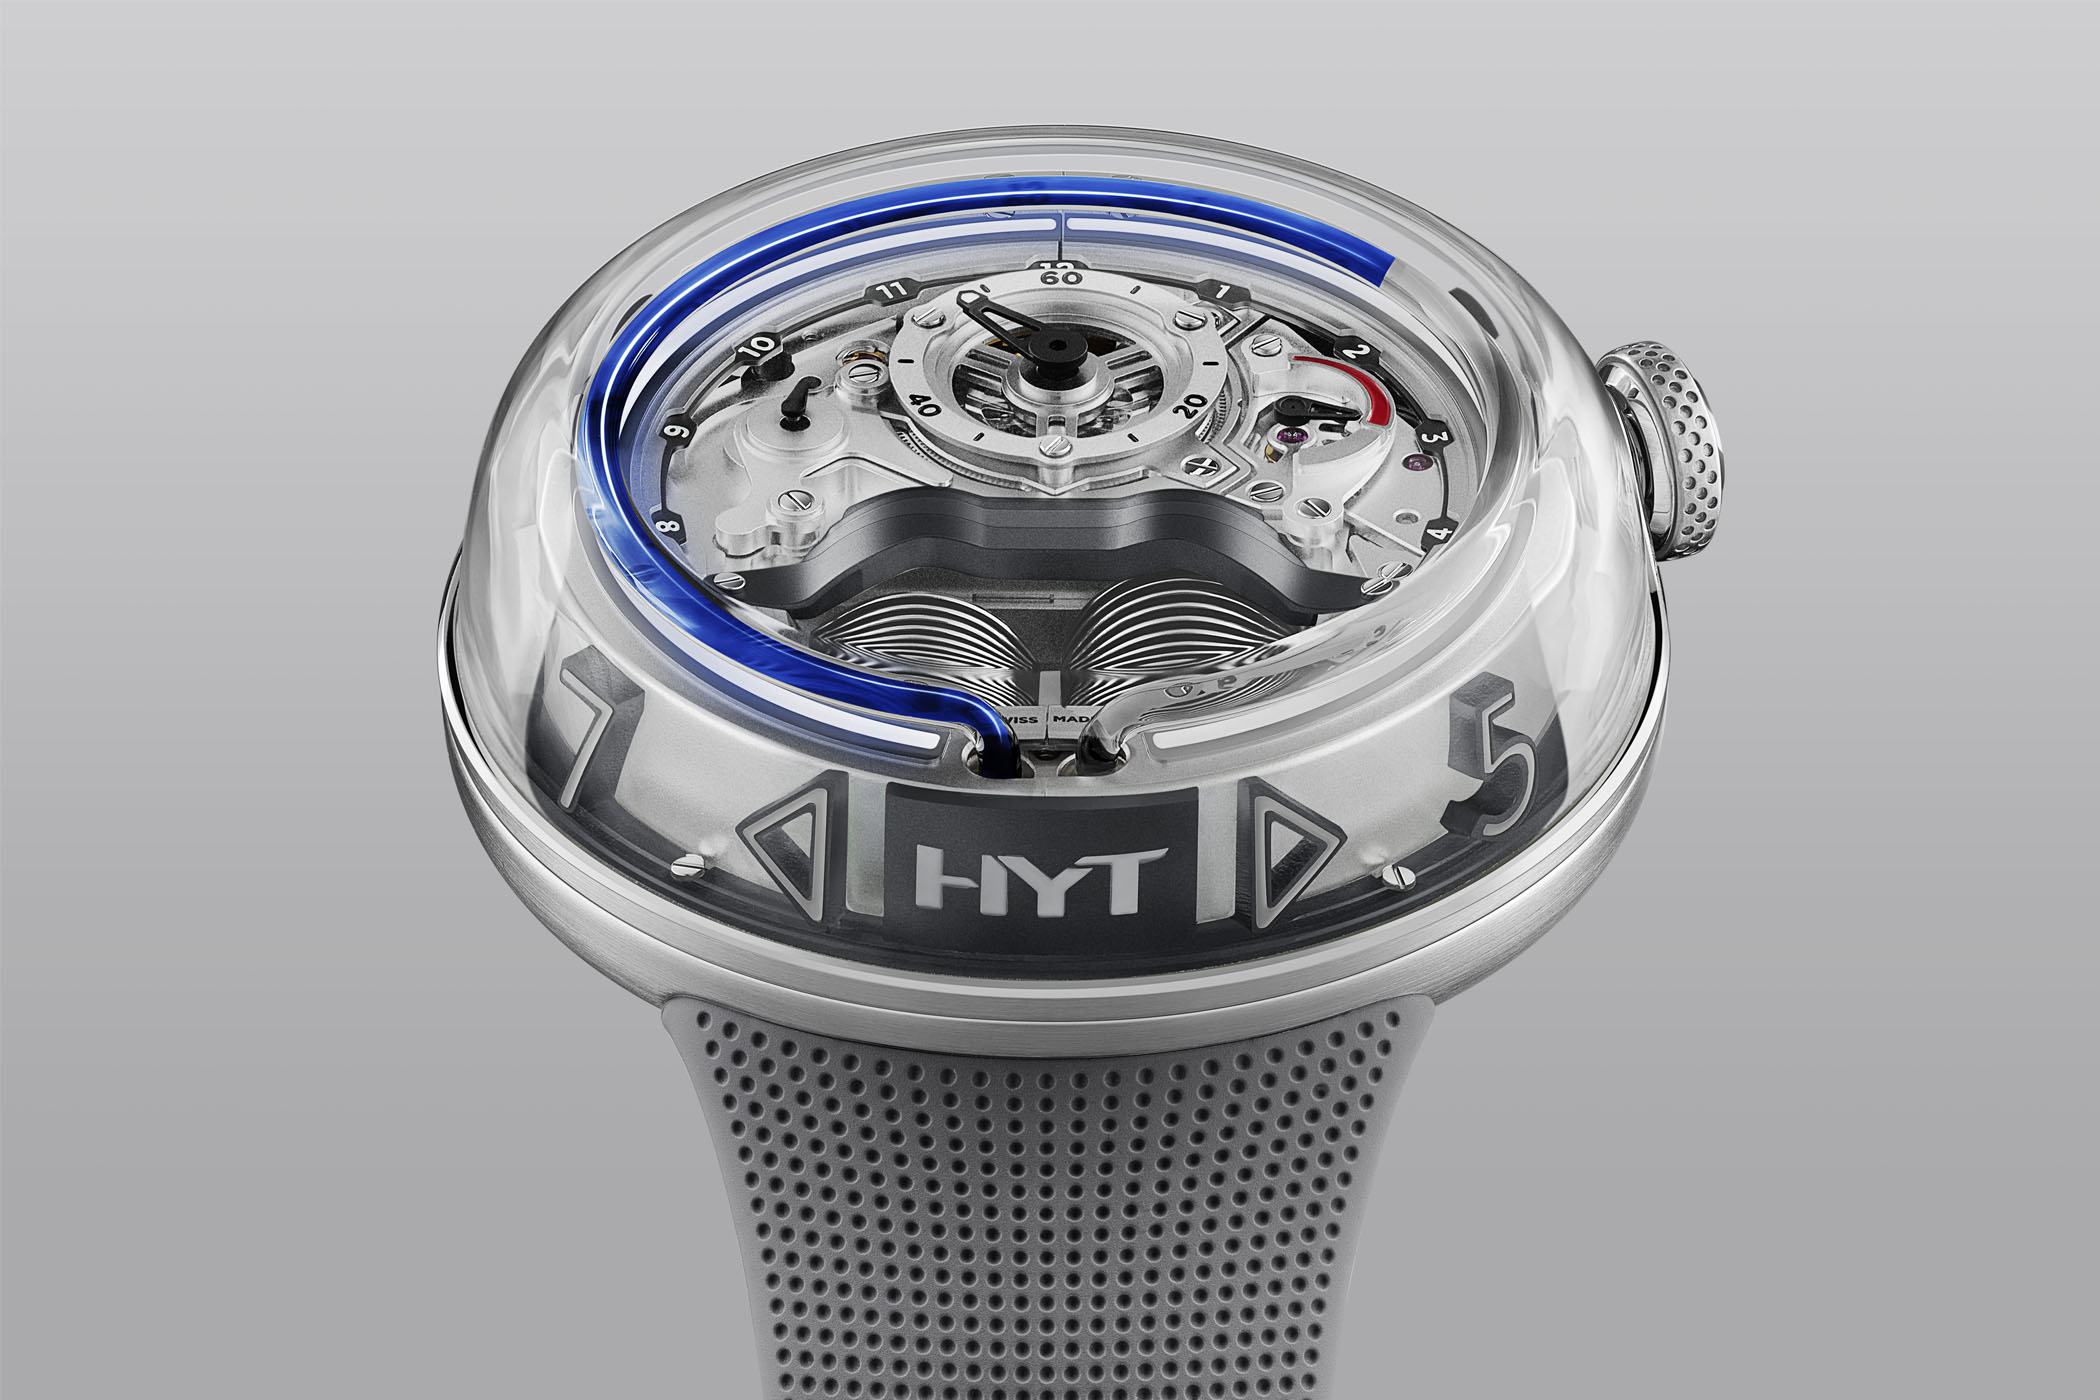 HYT Watches - Mission Hastroid 